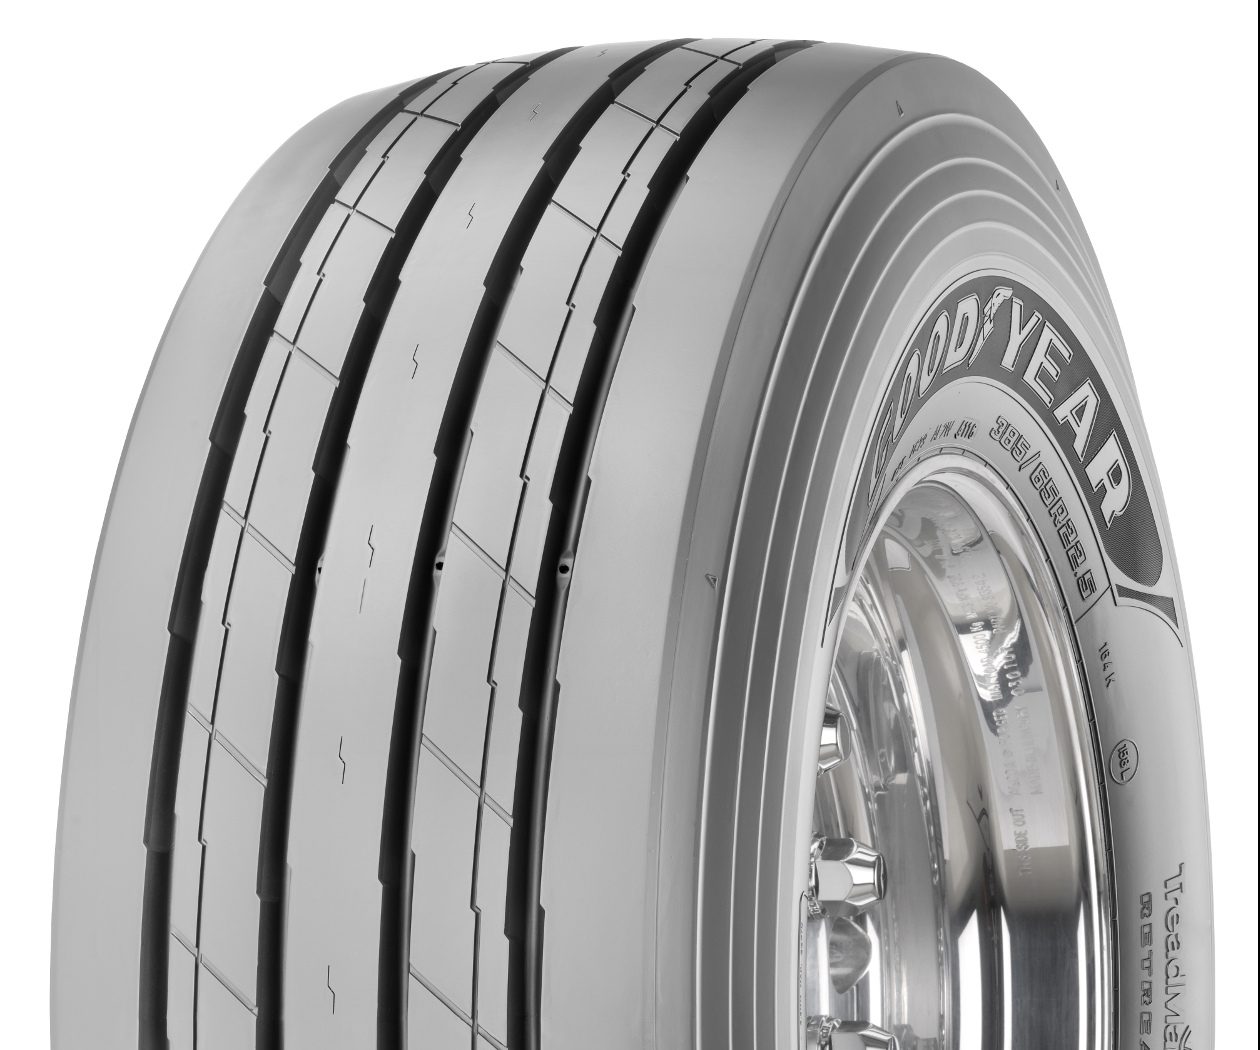 Cargo 4. 385/65r22.5 Goodyear KMAX T g2. 385/65r22.5 KMAX S g2 hl 164k158l 3psf Goodyear. 385/65r22.5 164k/158l Goodyear KMAX T g2 hl m+s. 385/65 R22.5 Goodyear KMAX S g2.